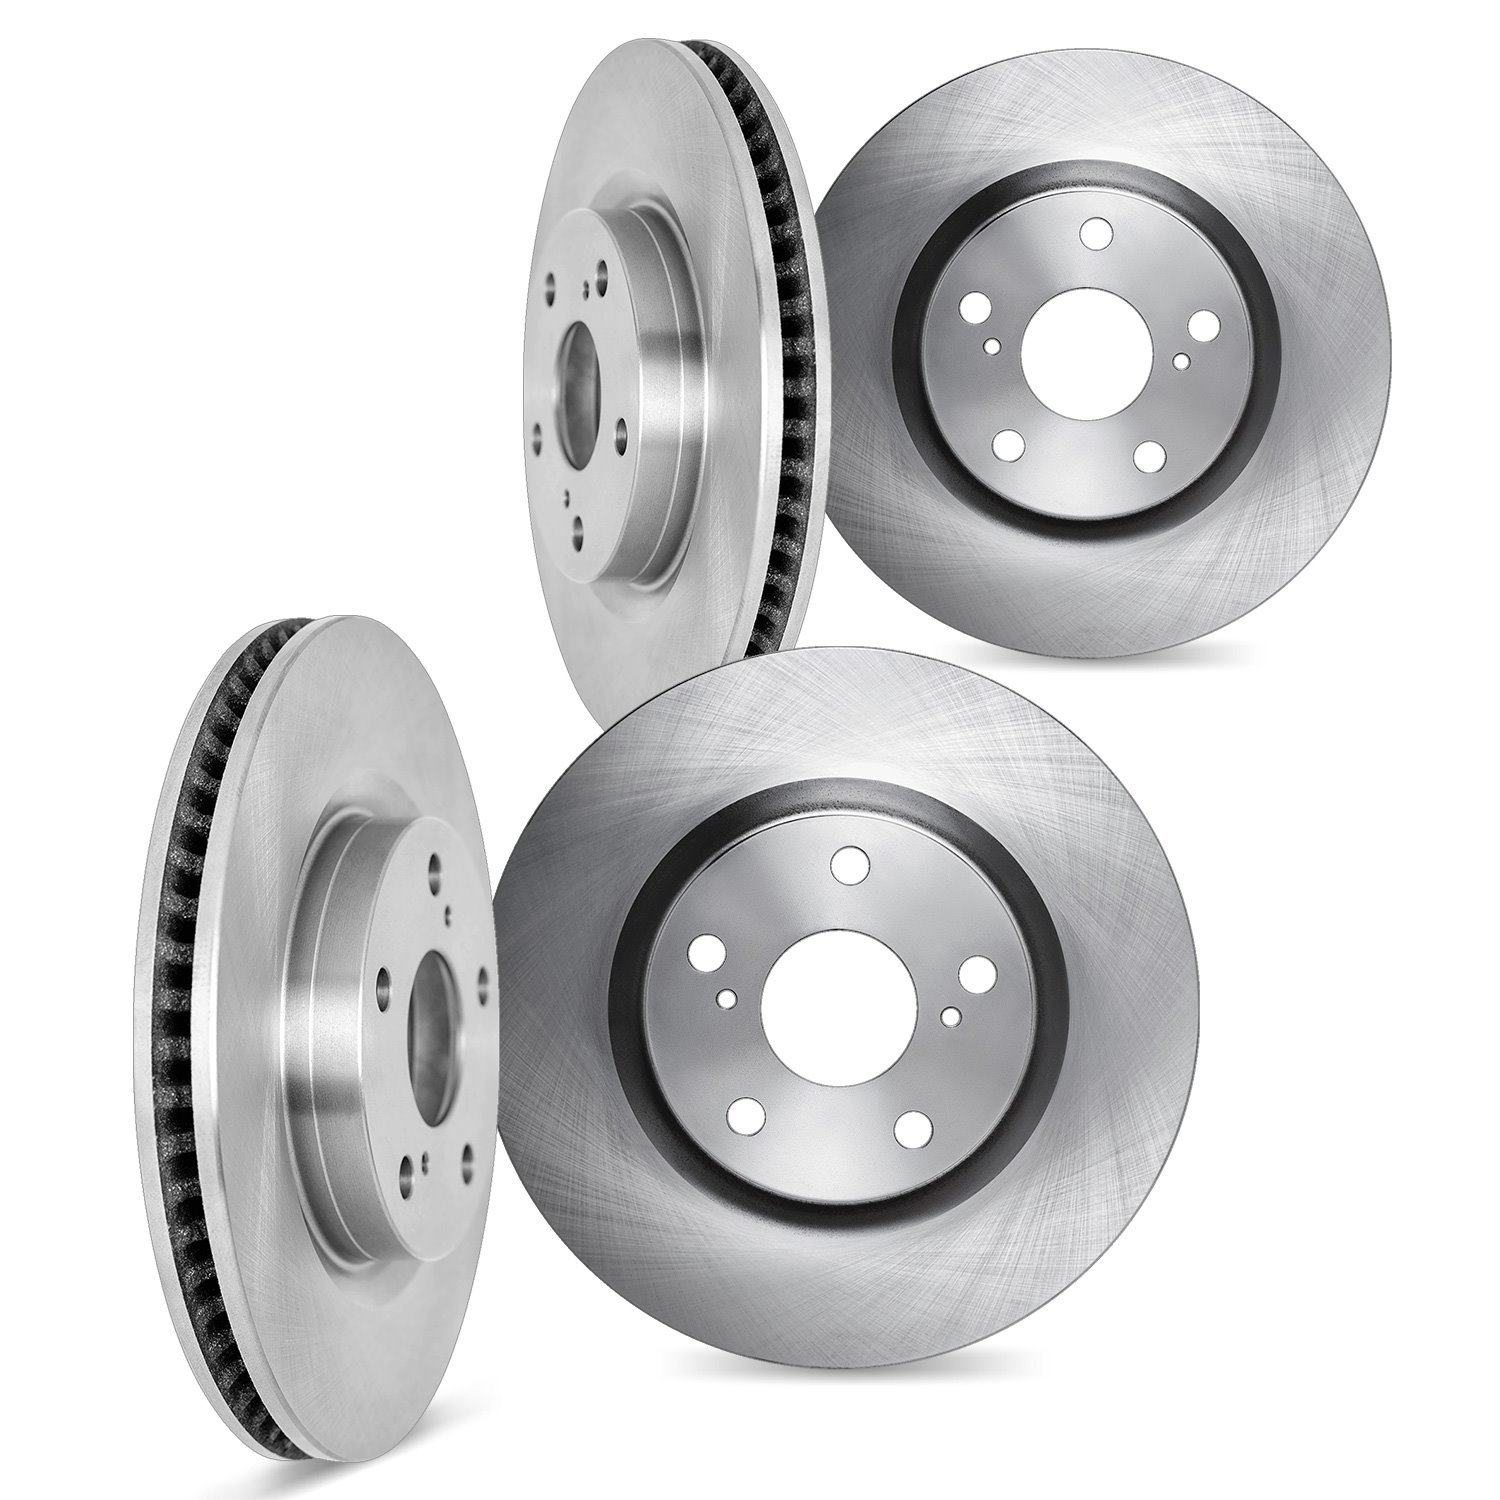 6004-54111 Brake Rotors, Fits Select Ford/Lincoln/Mercury/Mazda, Position: Front and Rear